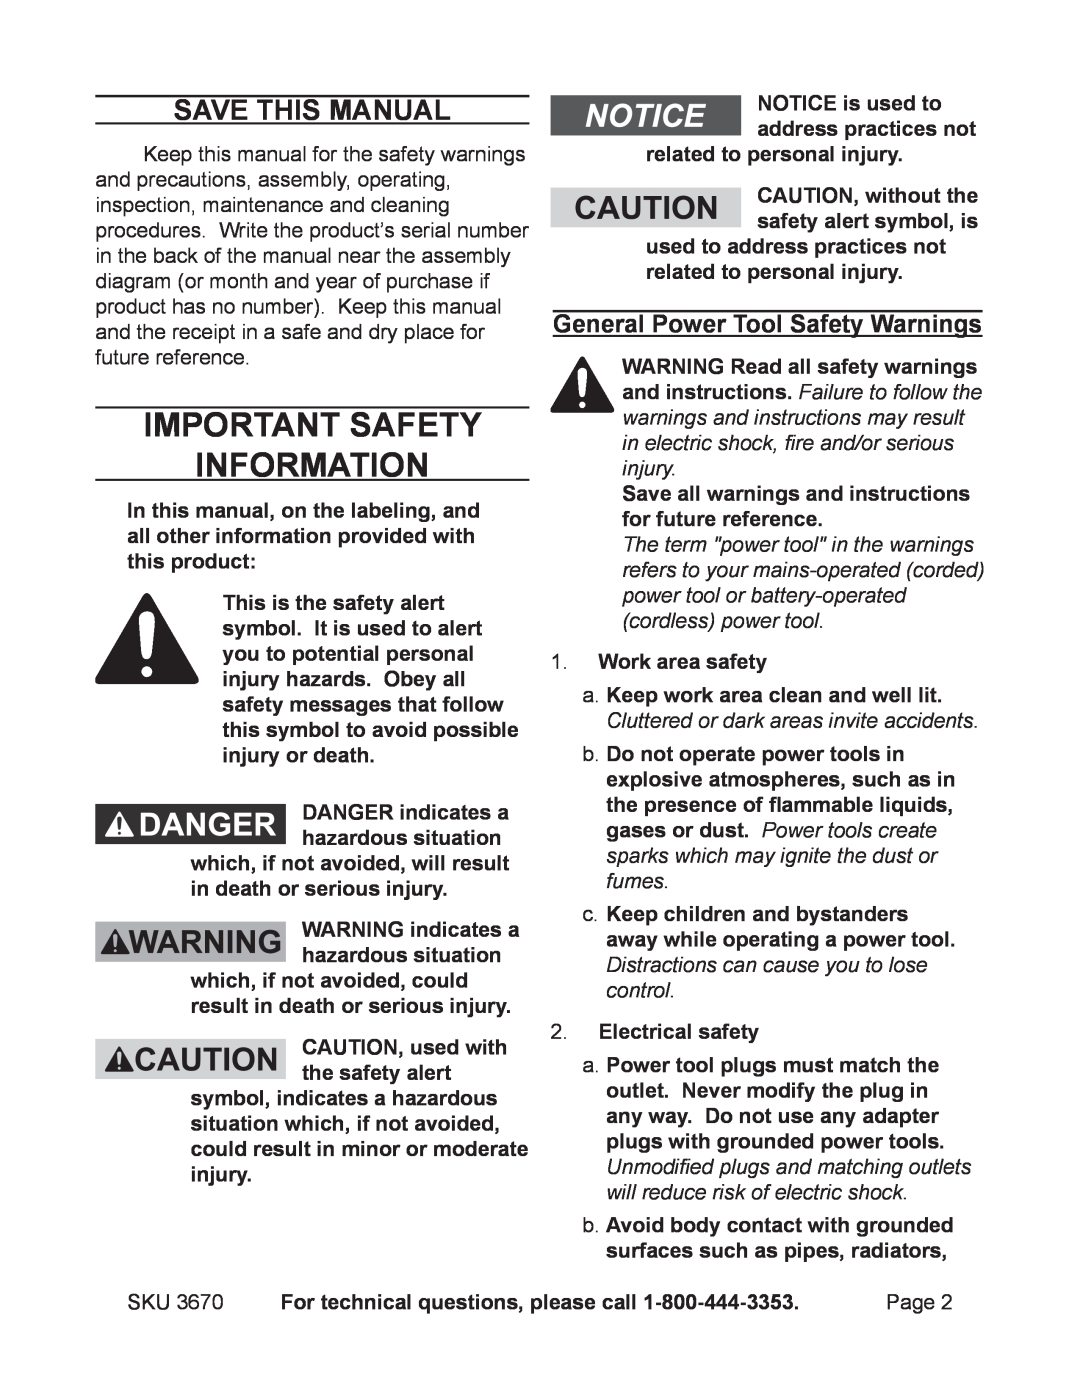 Harbor Freight Tools 3670 Important SAFETY Information, Save This Manual, General Power Tool Safety Warnings 